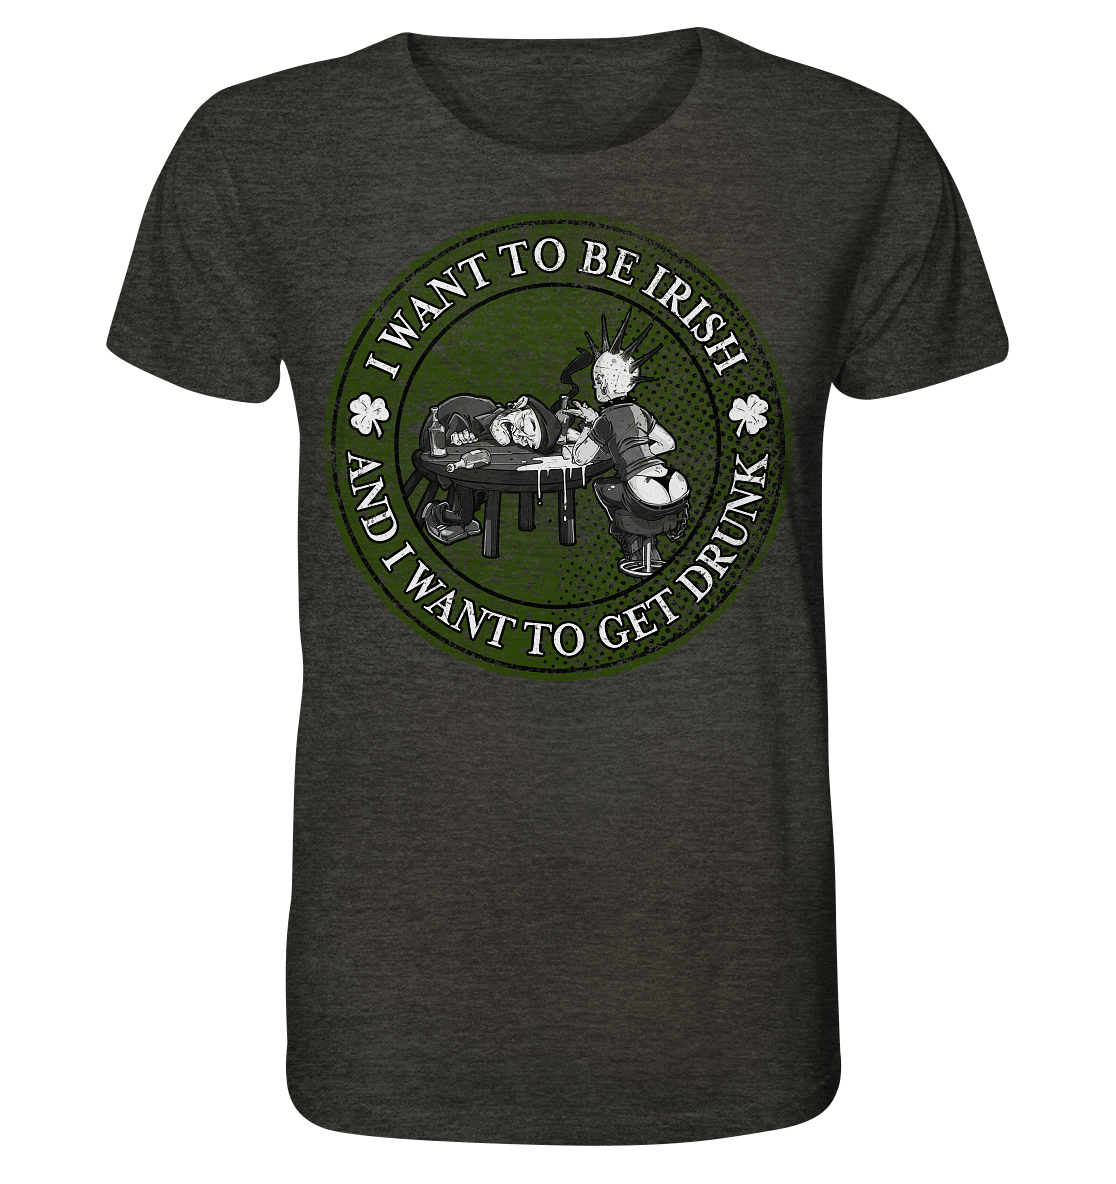 I Want To Be Irish And I Want To Get Drunk - Organic Shirt (meliert)